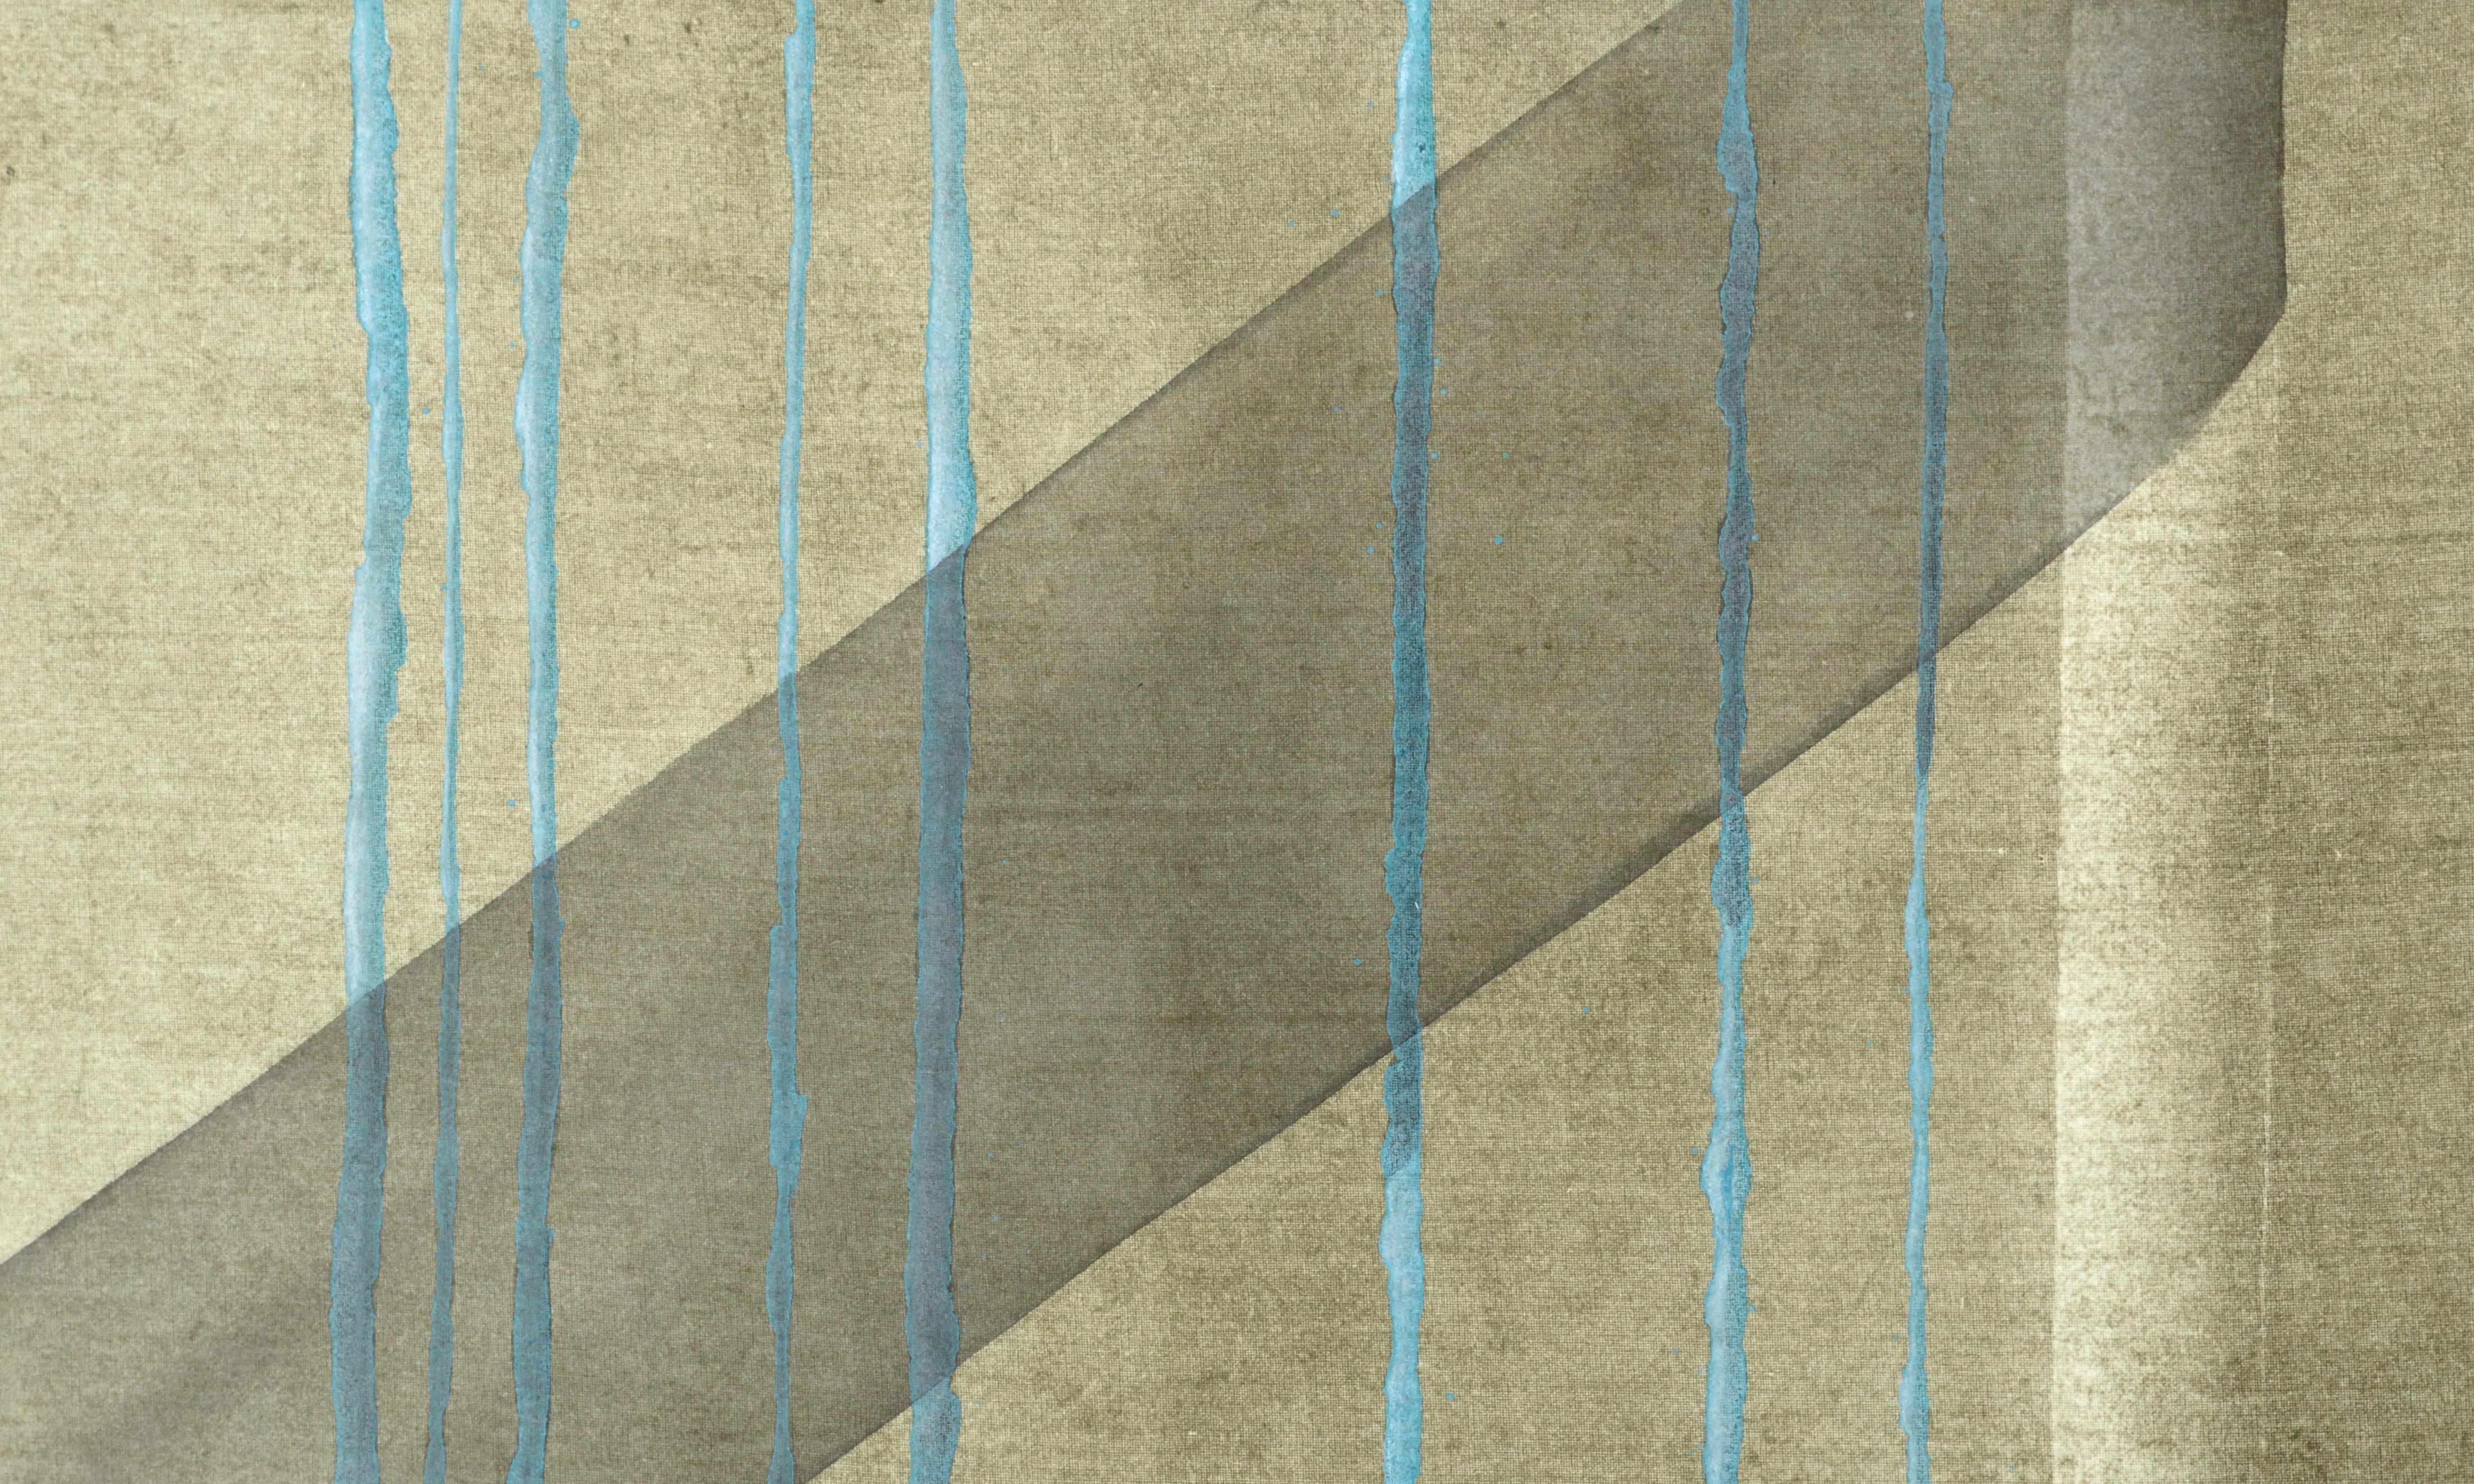 Black Ribbon with Teal Strands - Hand Augmented Collotype - Blue Abstract Print by Patricia A Pearce